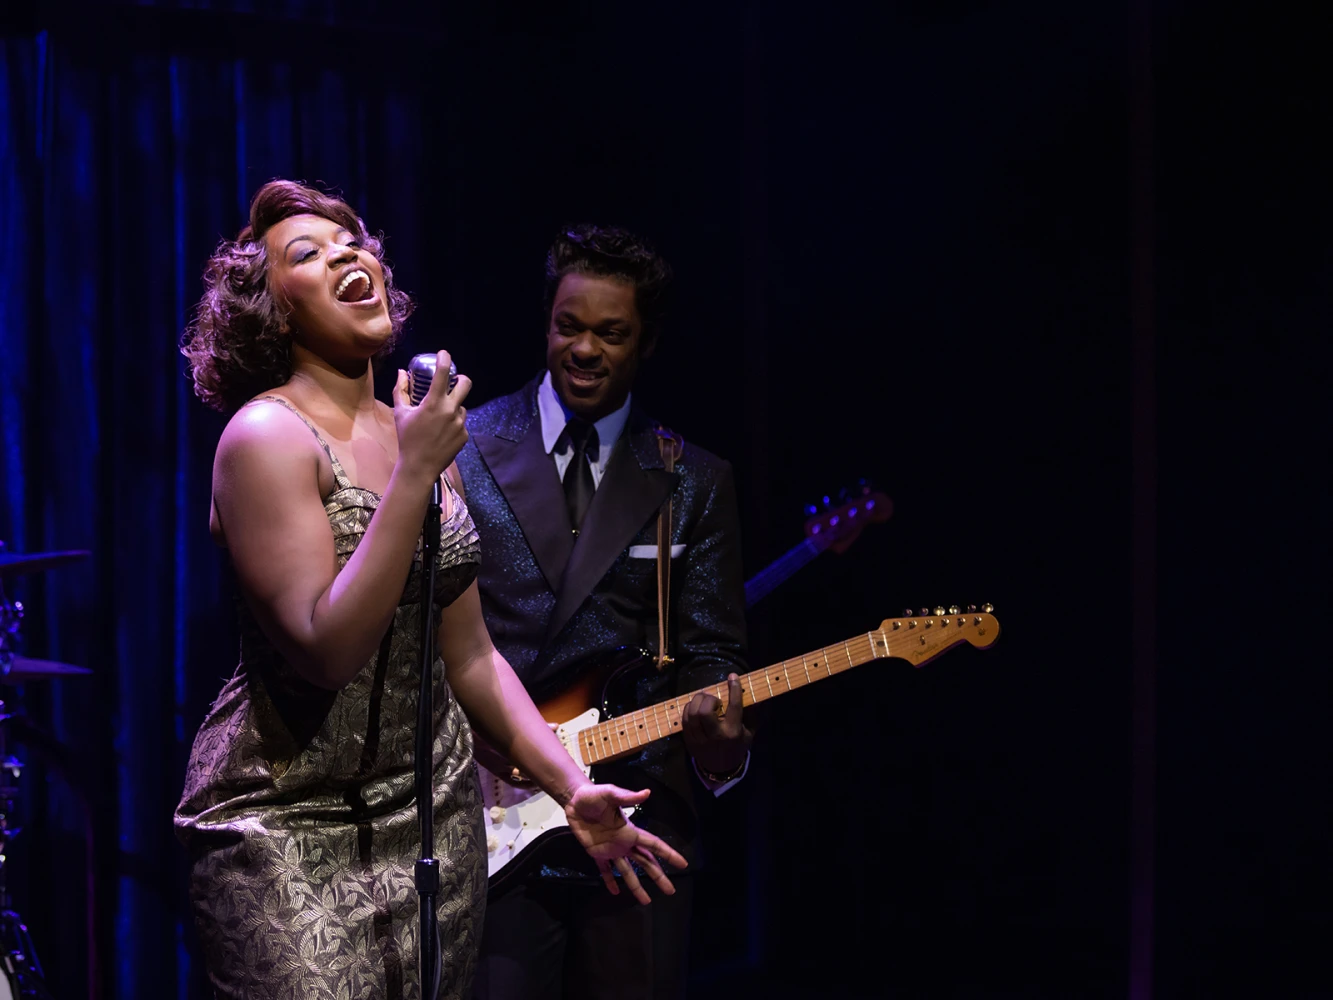 TINA - The Tina Turner Musical at the Lyric Theatre, QPAC: What to expect - 8